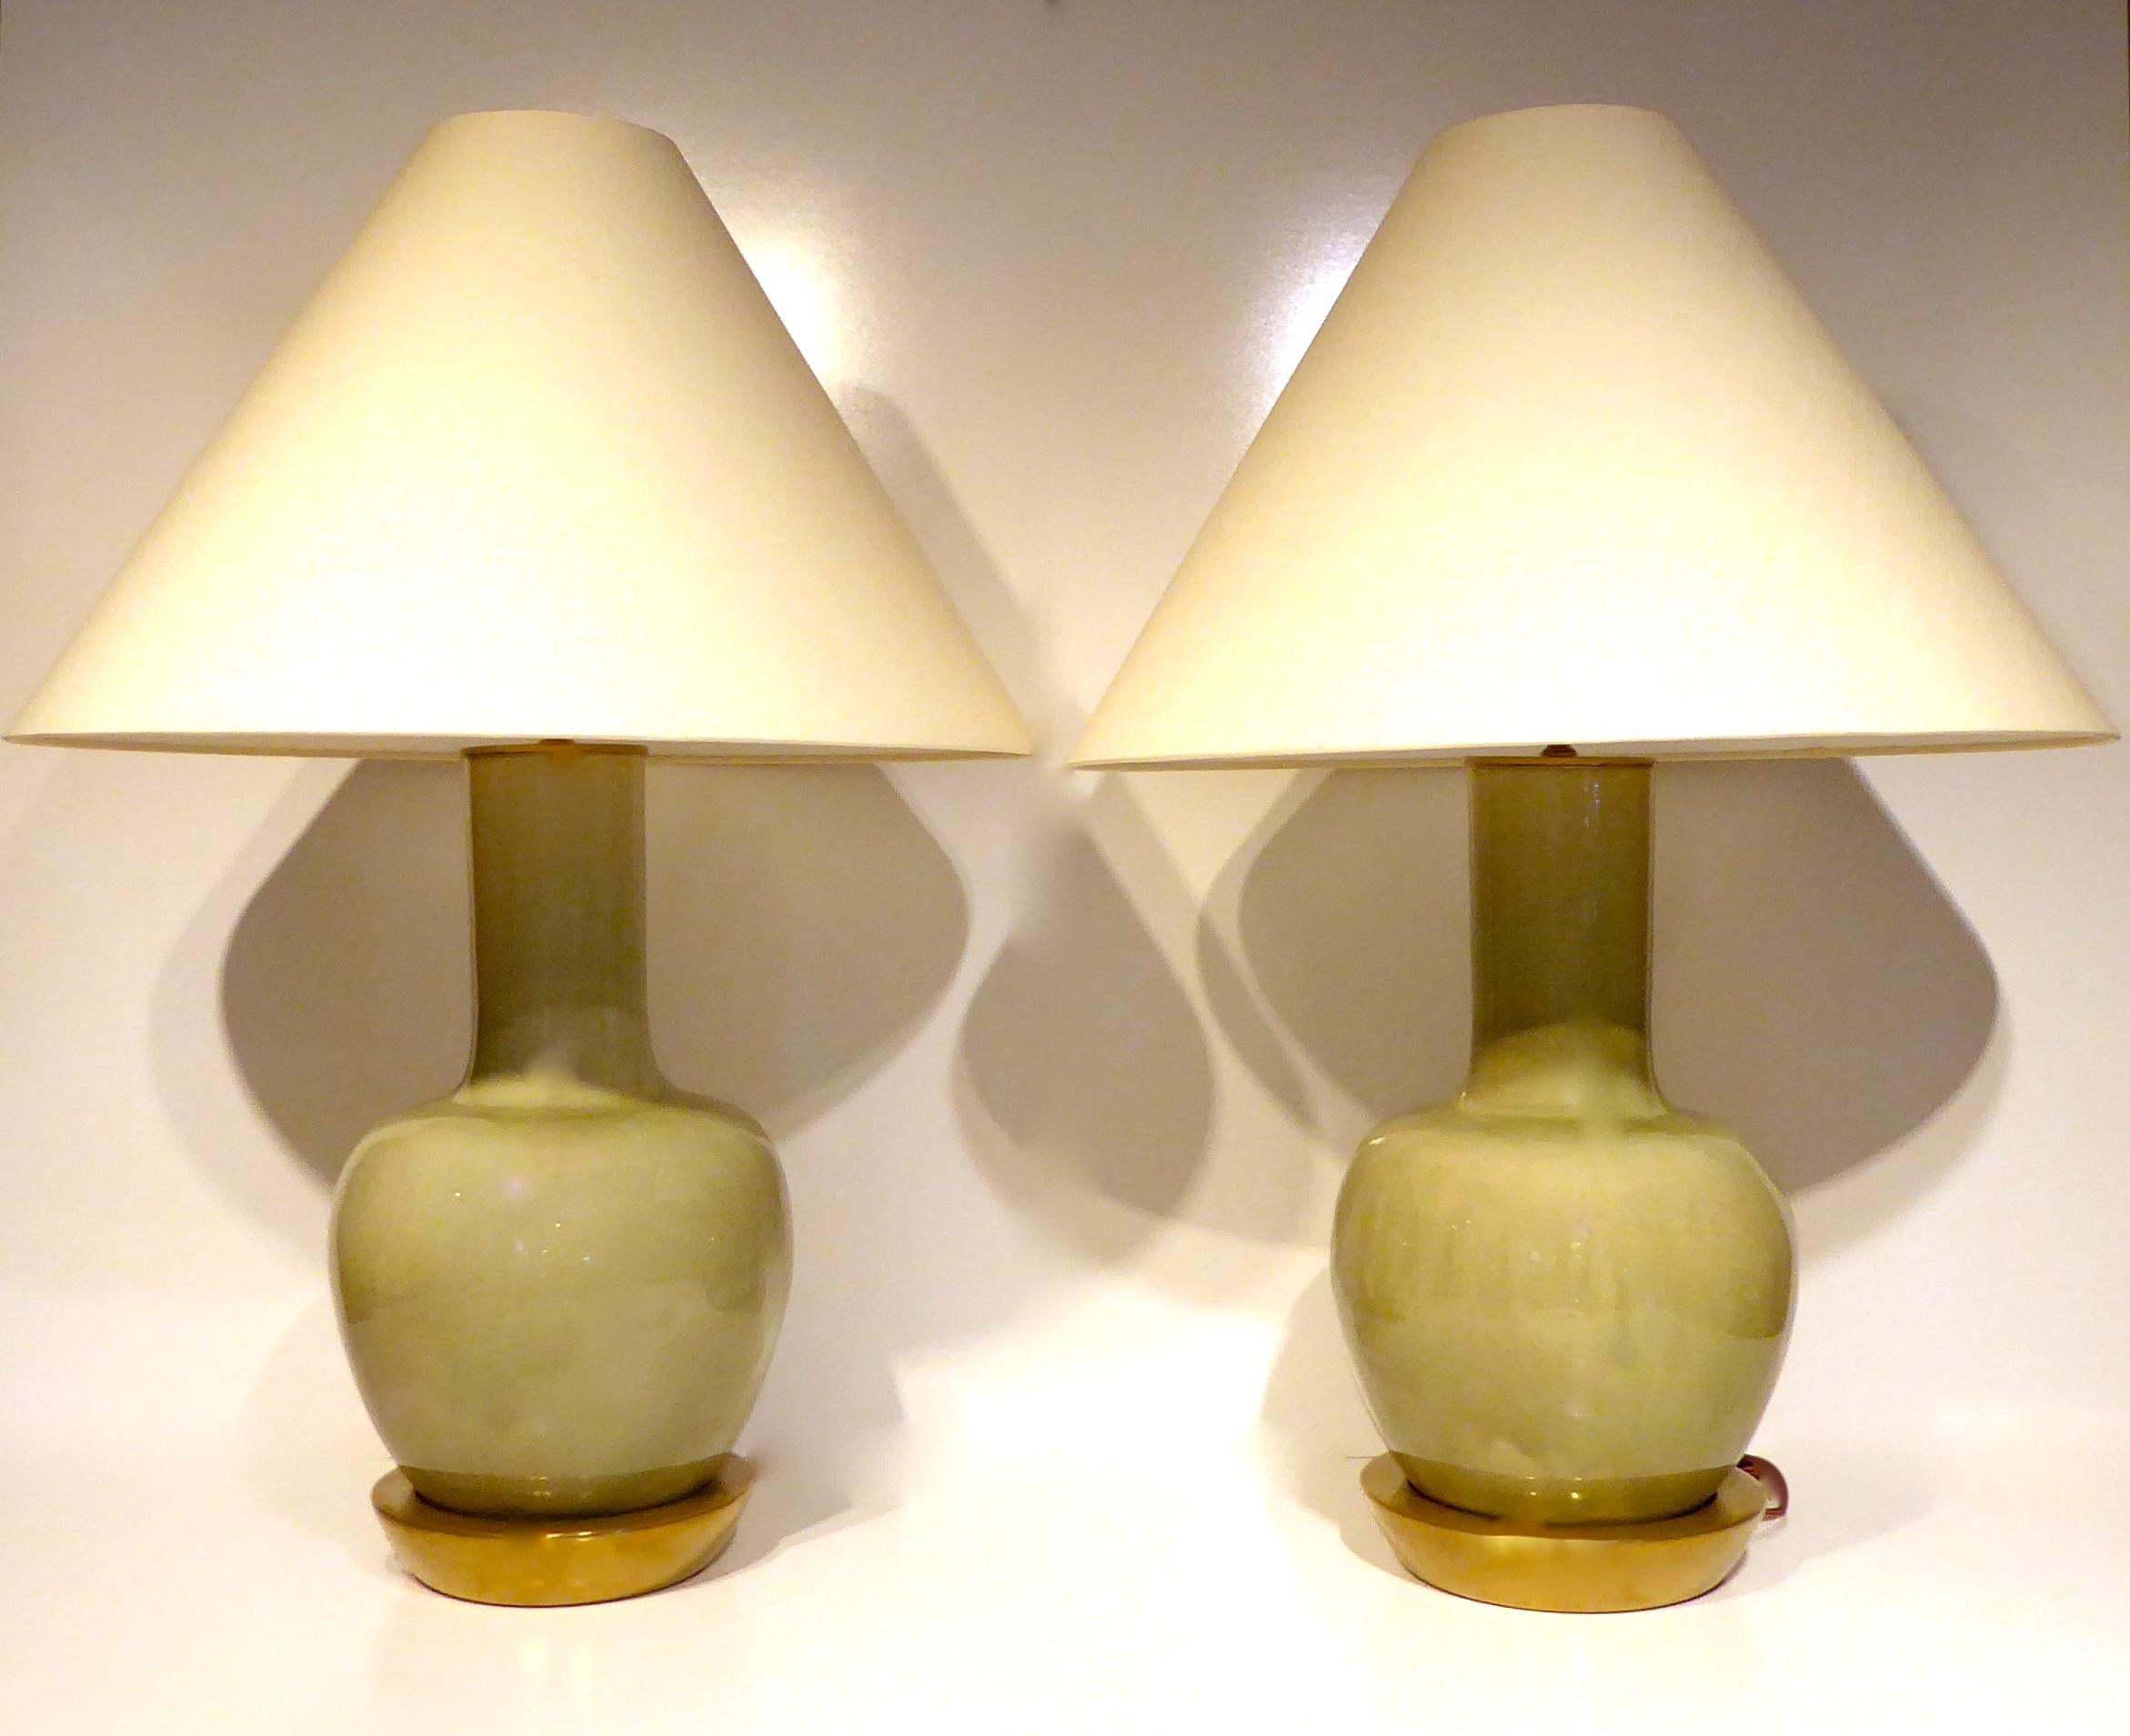 A pair of gourd-shaped Japanese celadon glazed porcelain lamps, circa 1950s. The lamps retain their original bases, which have been recently brass-coated to match the hardware. One of the lamps had an old, faded label that said 